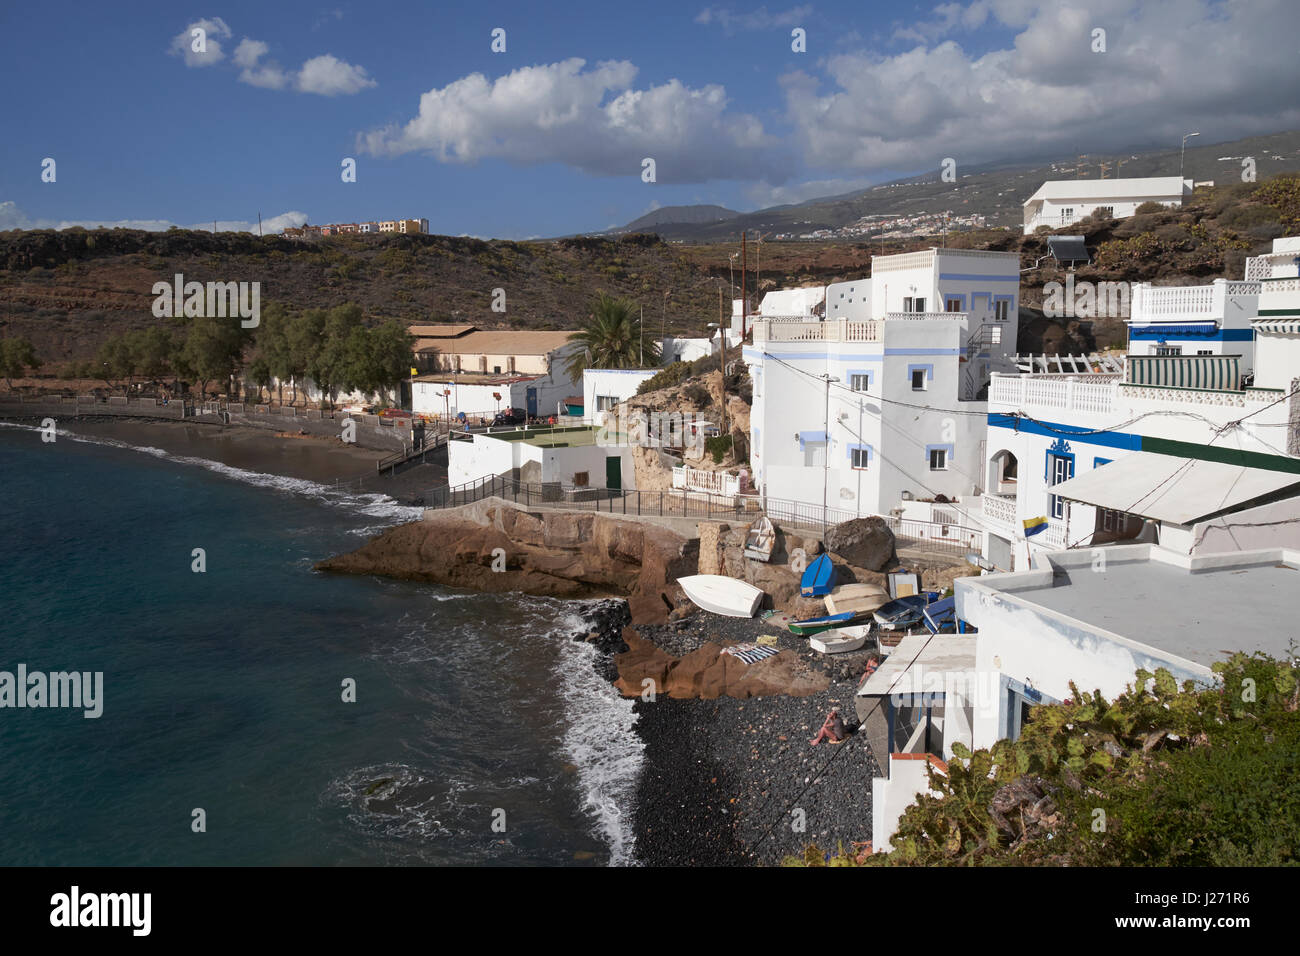 The Canarian fishing village of El Puertito, Tenerife, Canary Islands, Spain. Stock Photo